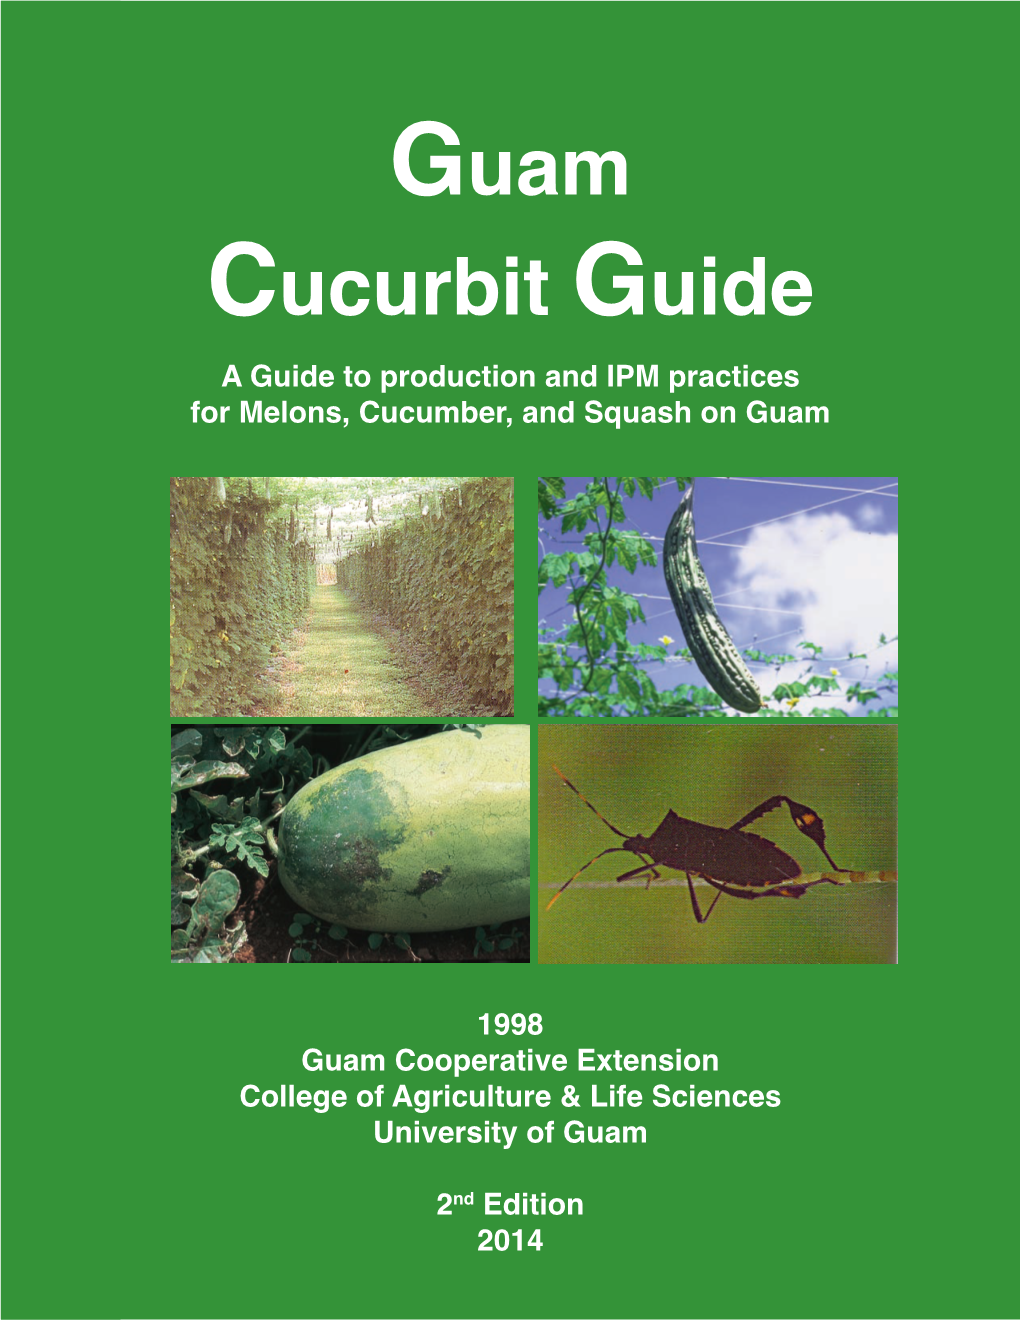 Guam Cucurbit Guide a Guide to Production and IPM Practices for Melons, Cucumber, and Squash on Guam